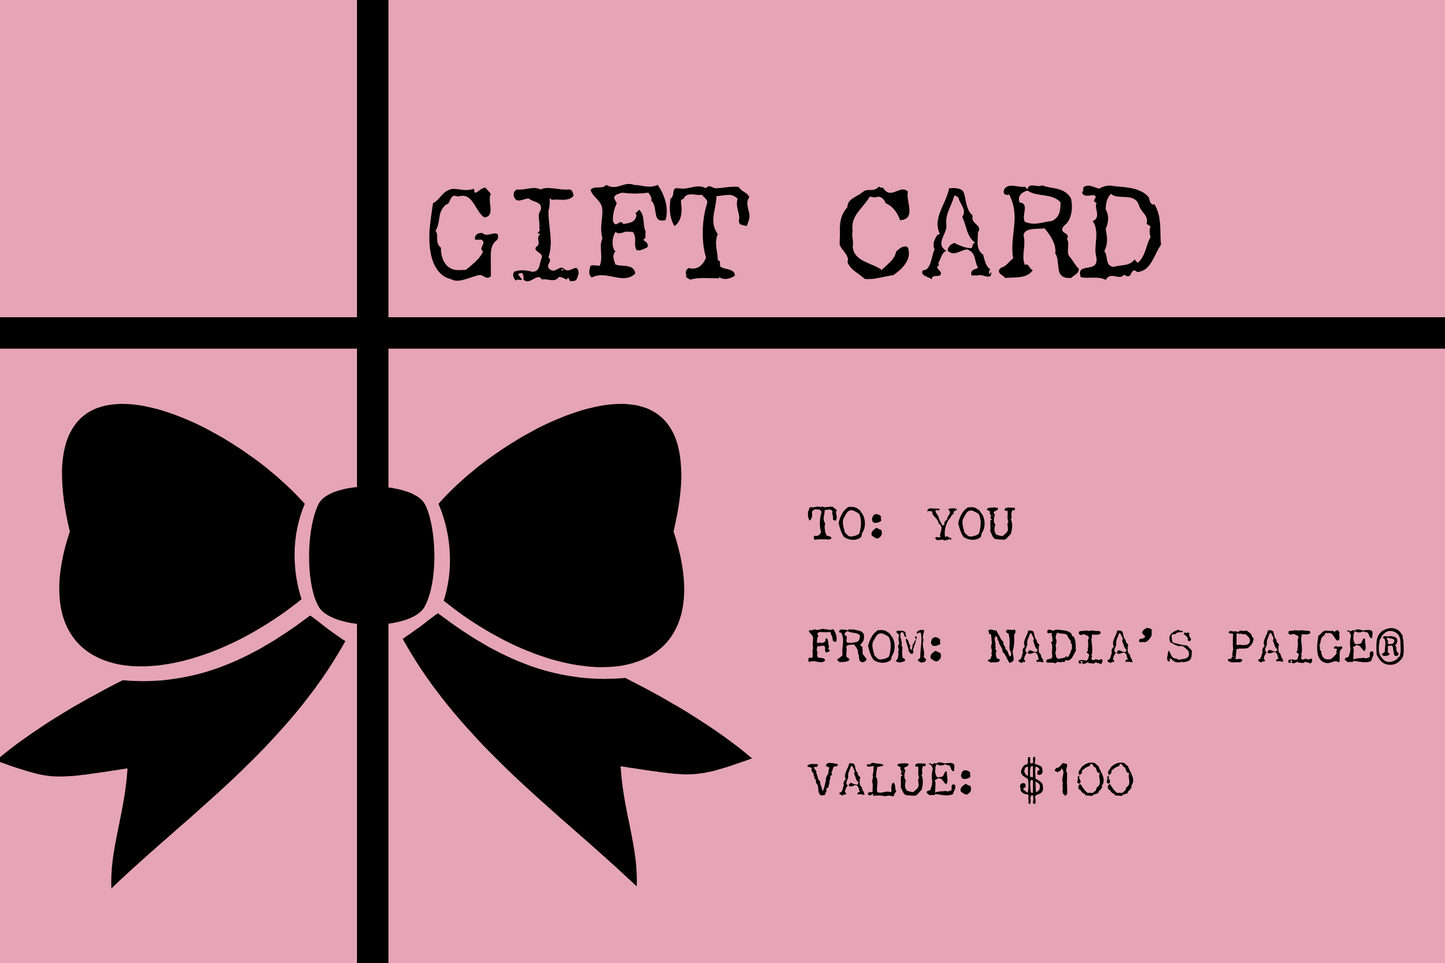 NADIA'S PAIGE GIFT CARD